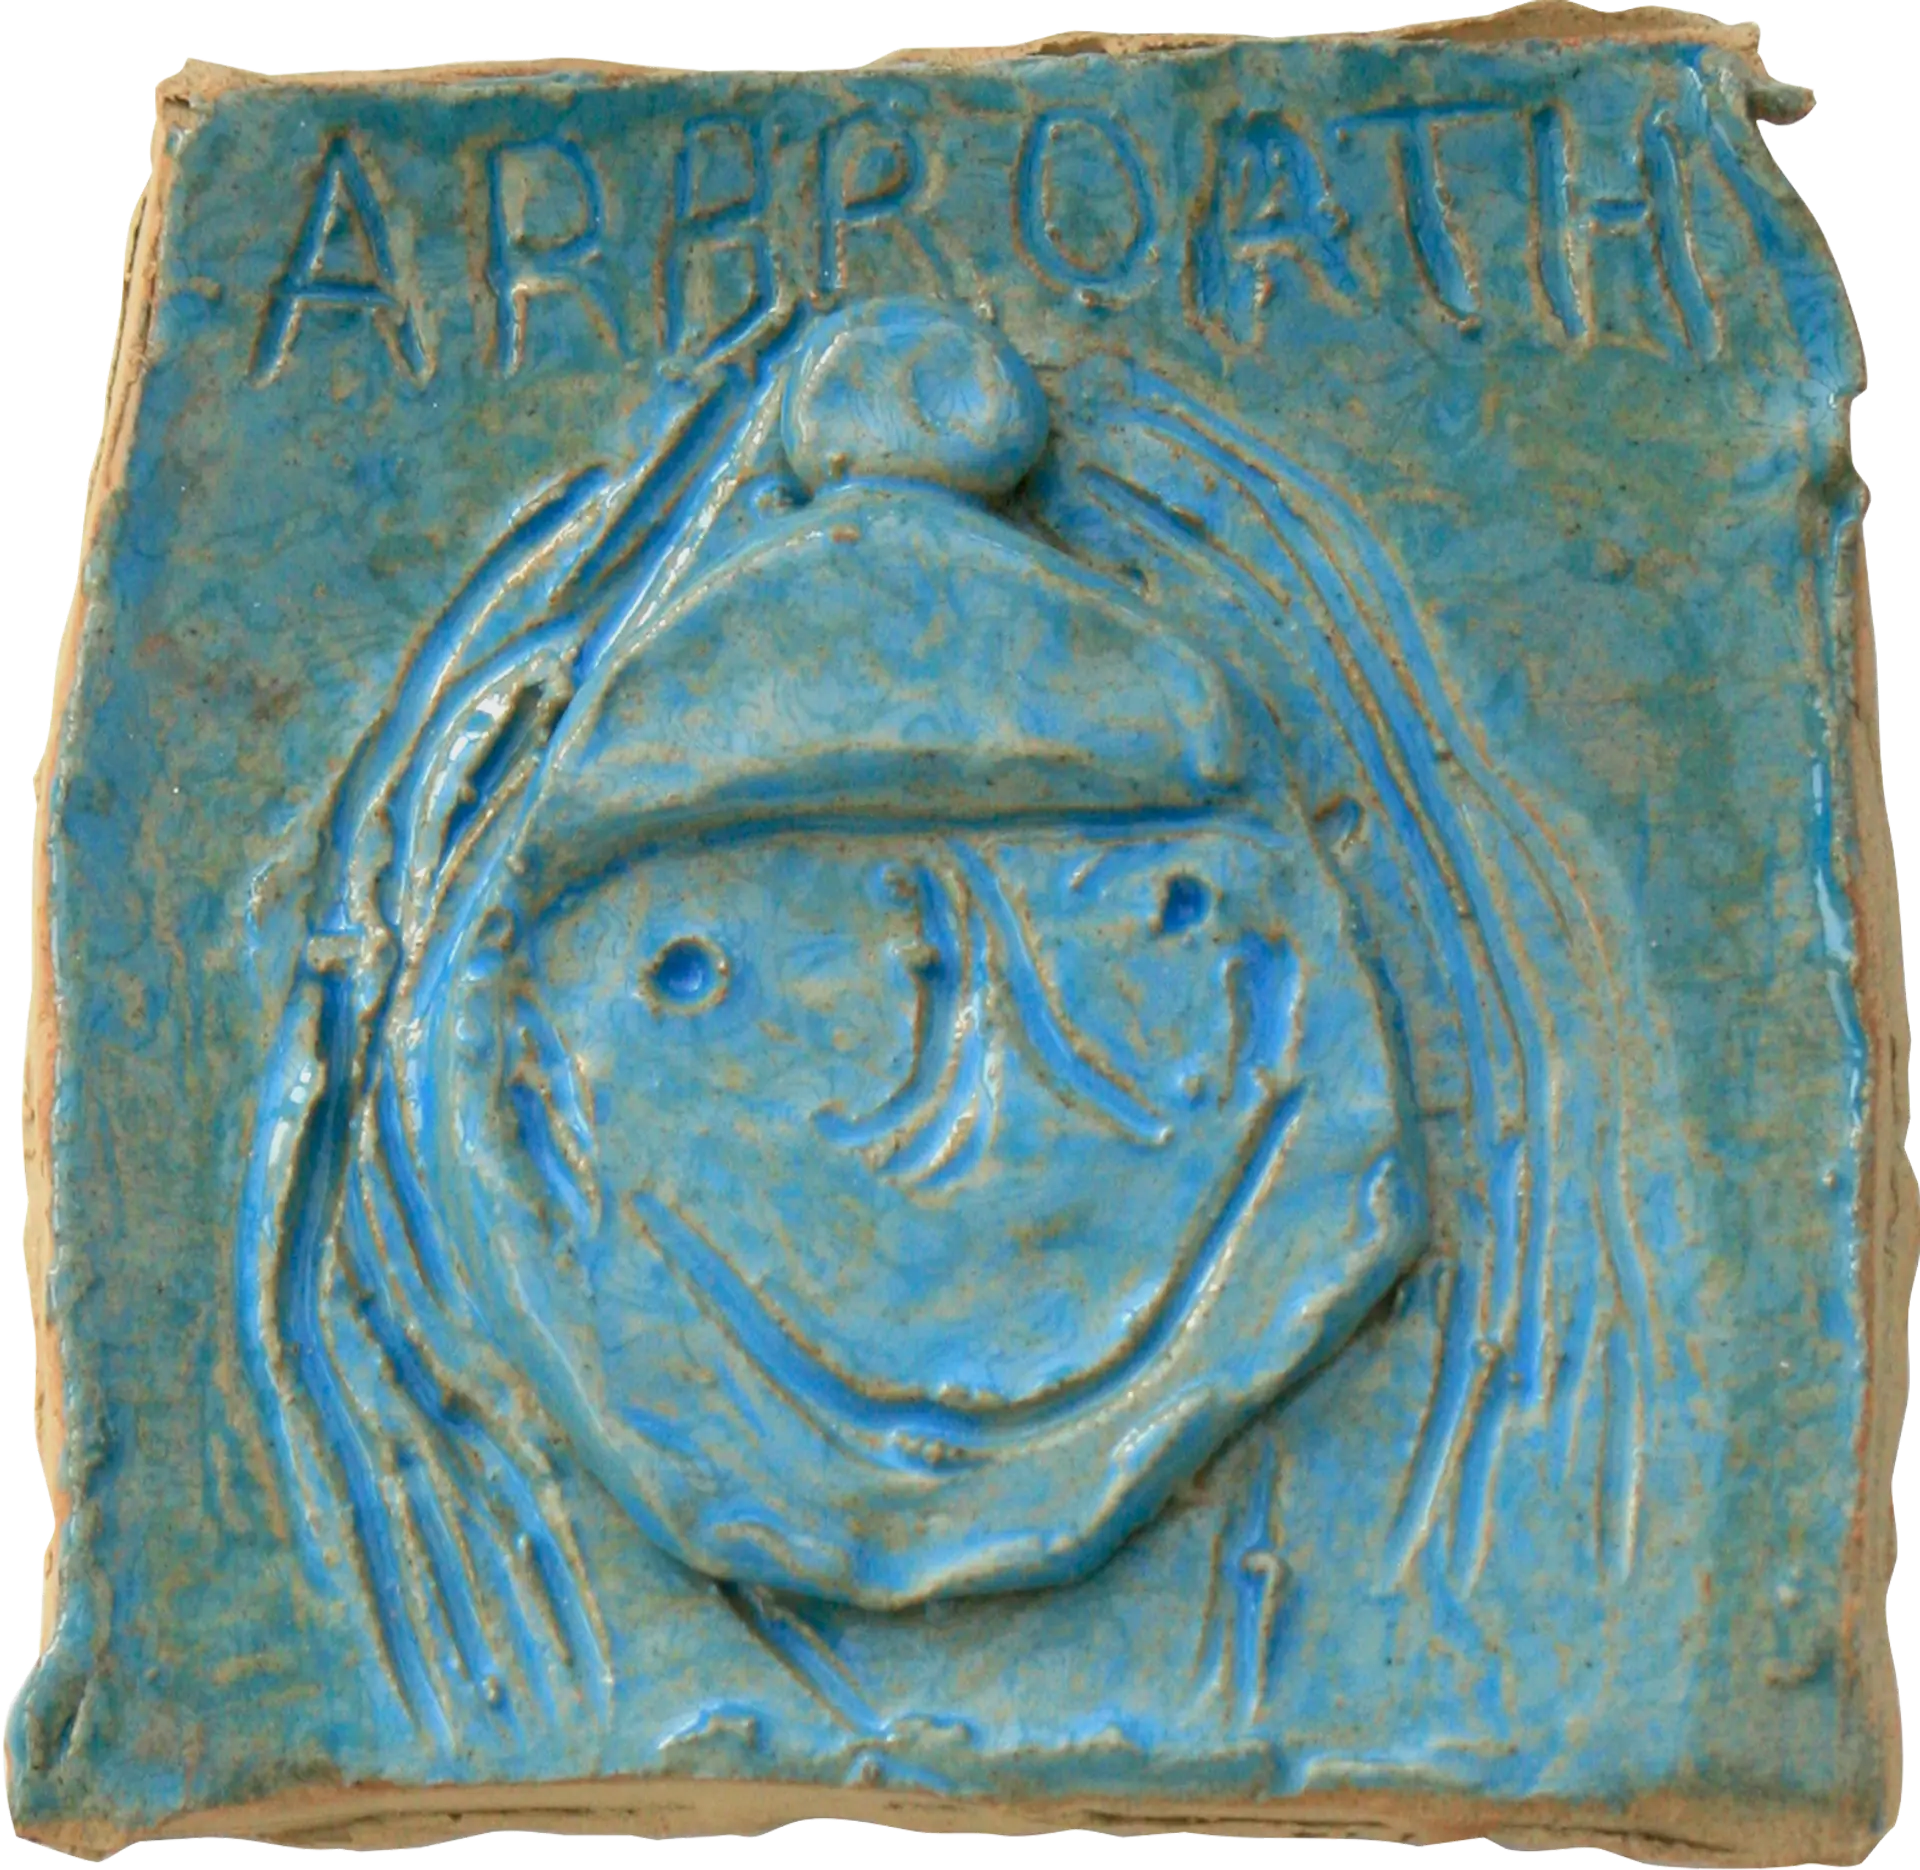 A blue glazed ceramic tile of Helen, a self portrait. She has a hat on and is smiling, written above her is ‘ARBROATH’